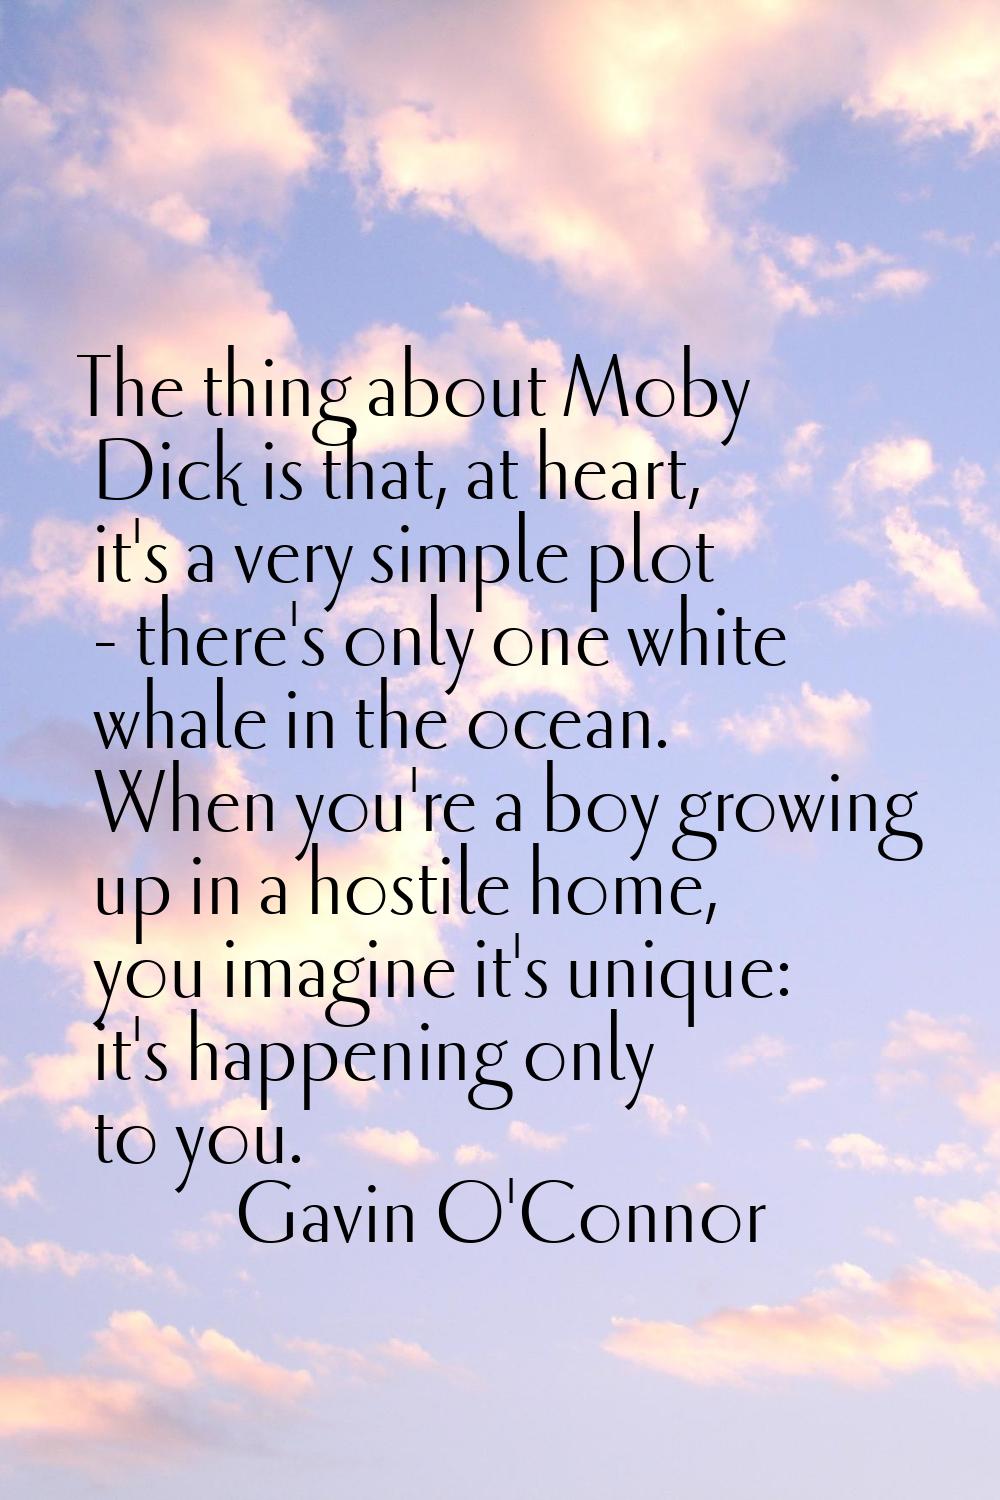 The thing about Moby Dick is that, at heart, it's a very simple plot - there's only one white whale